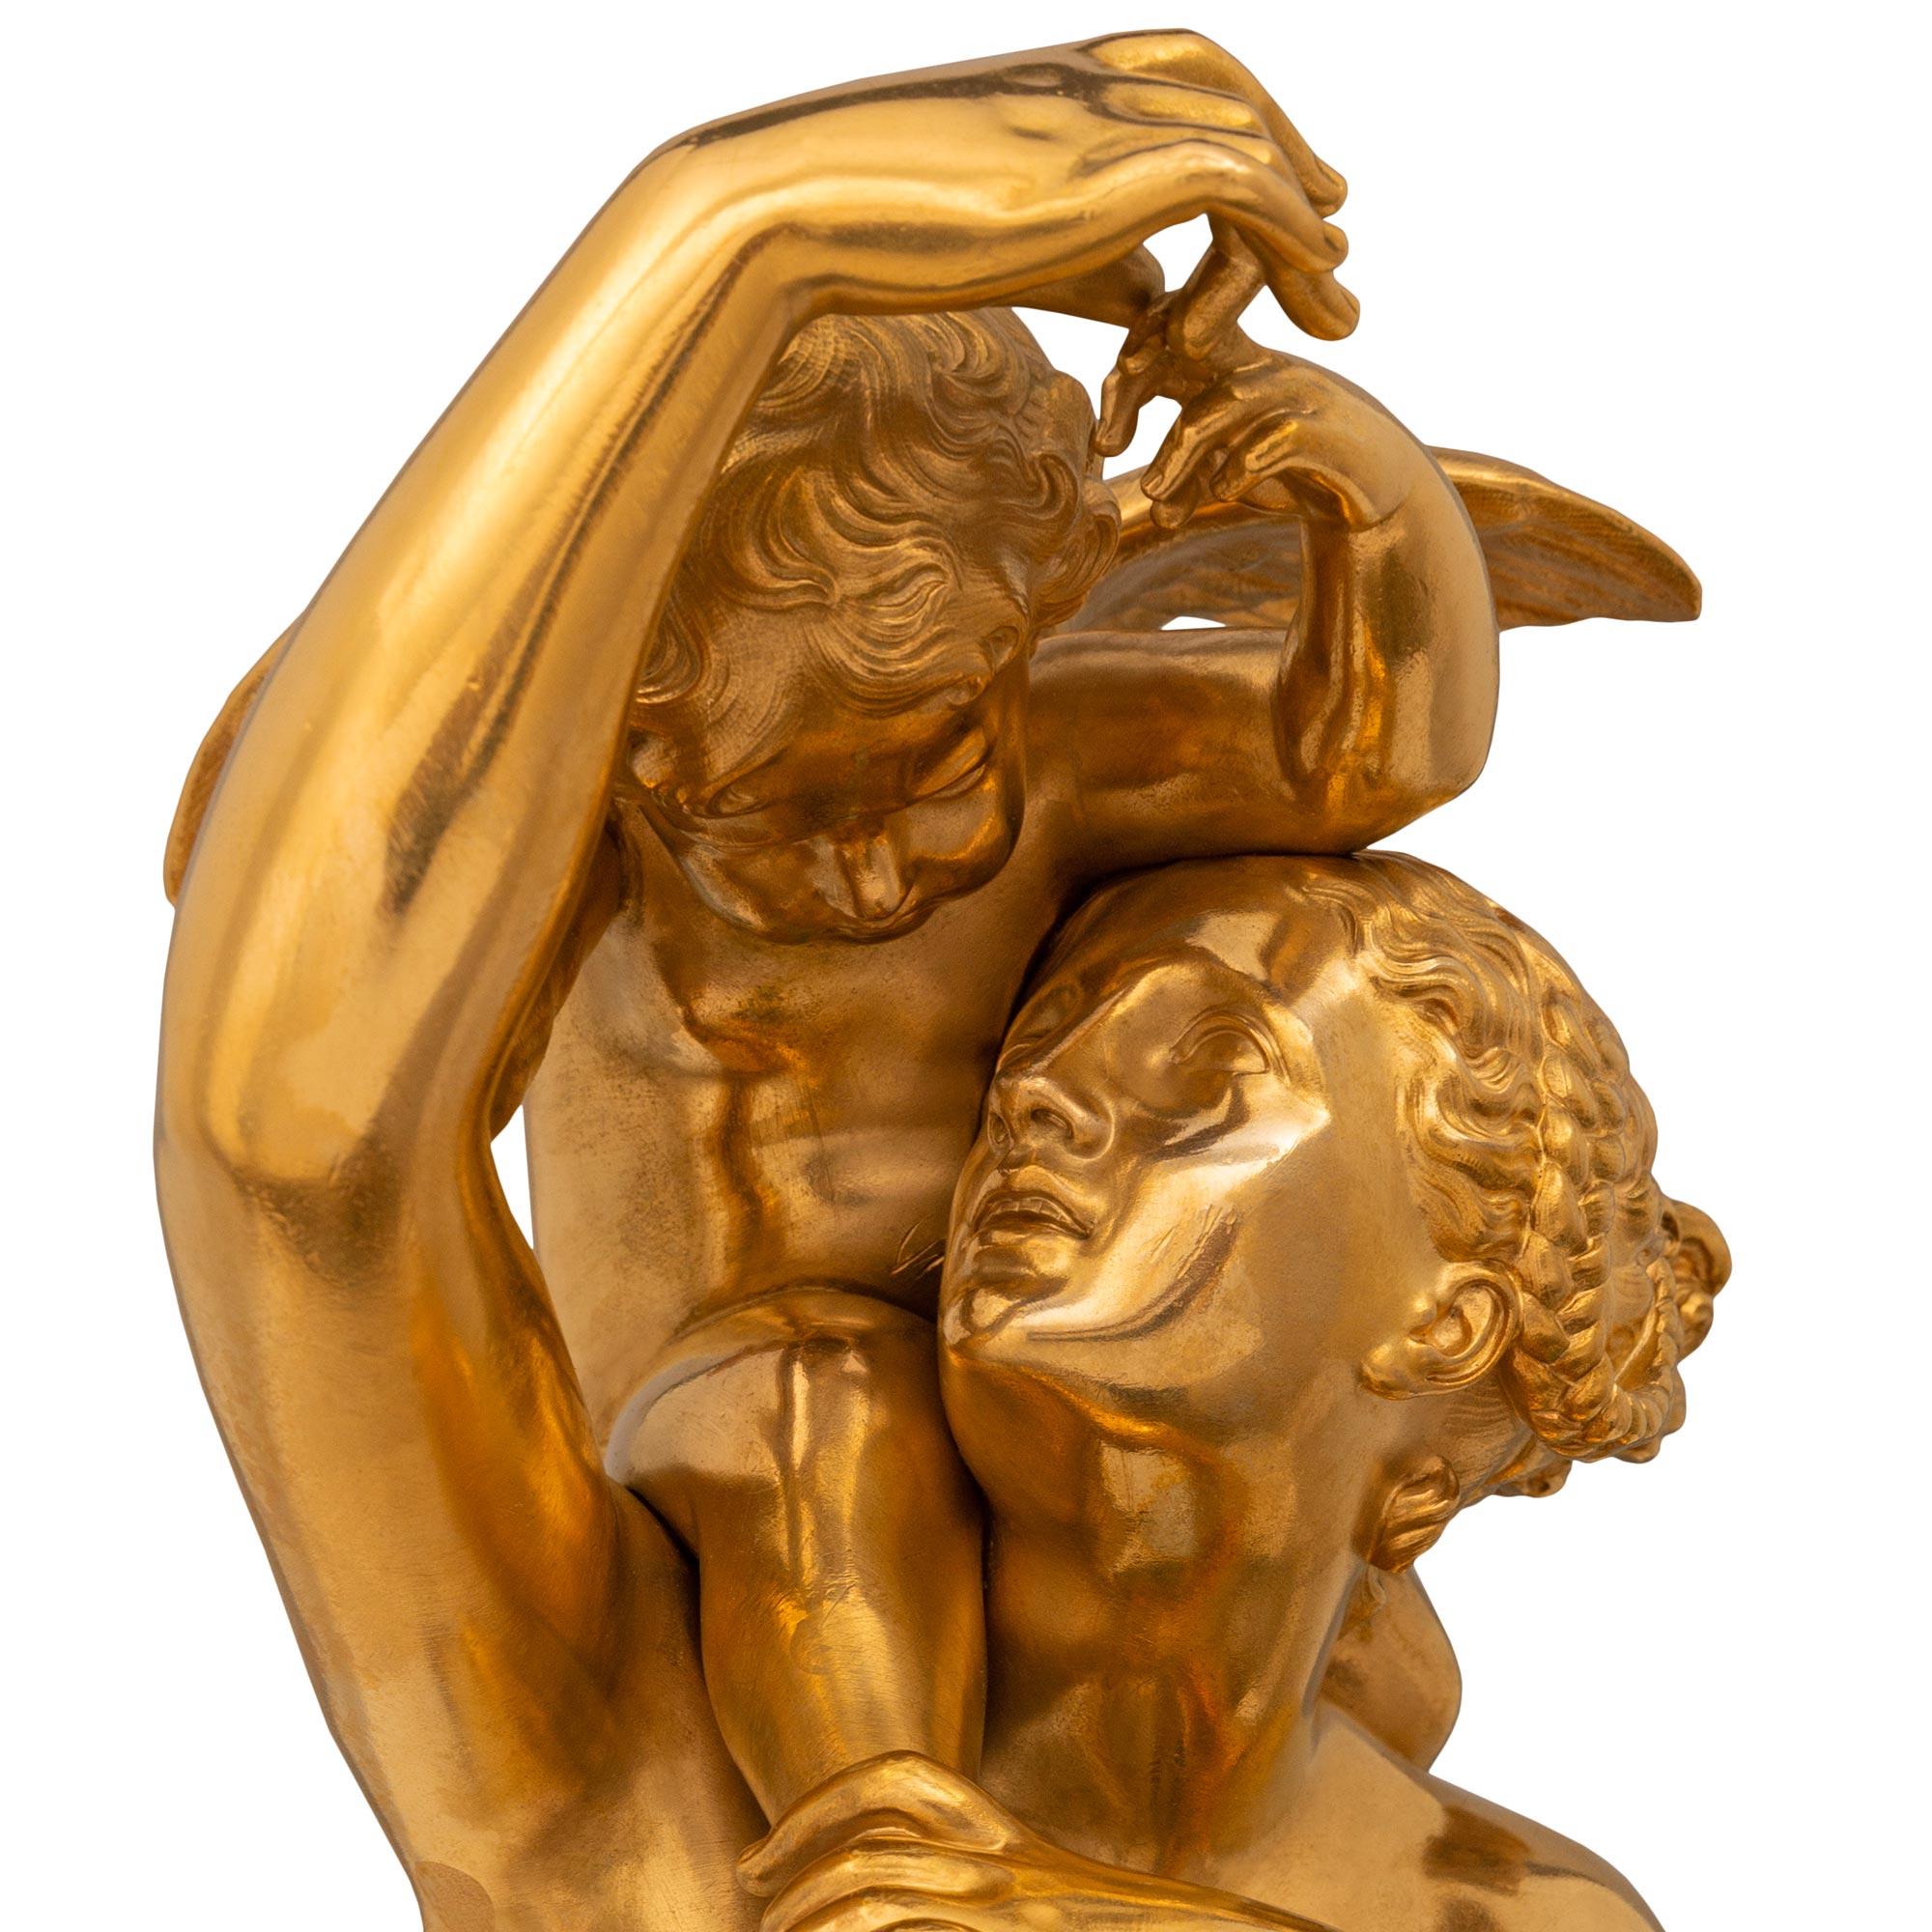 A wonderful and finely detailed French 19th century Ormolu and Patinated Bronze statue titled Allegorie de L'amour Maternel, signed Fraikin and Vittoz. The stunning statue's title means 